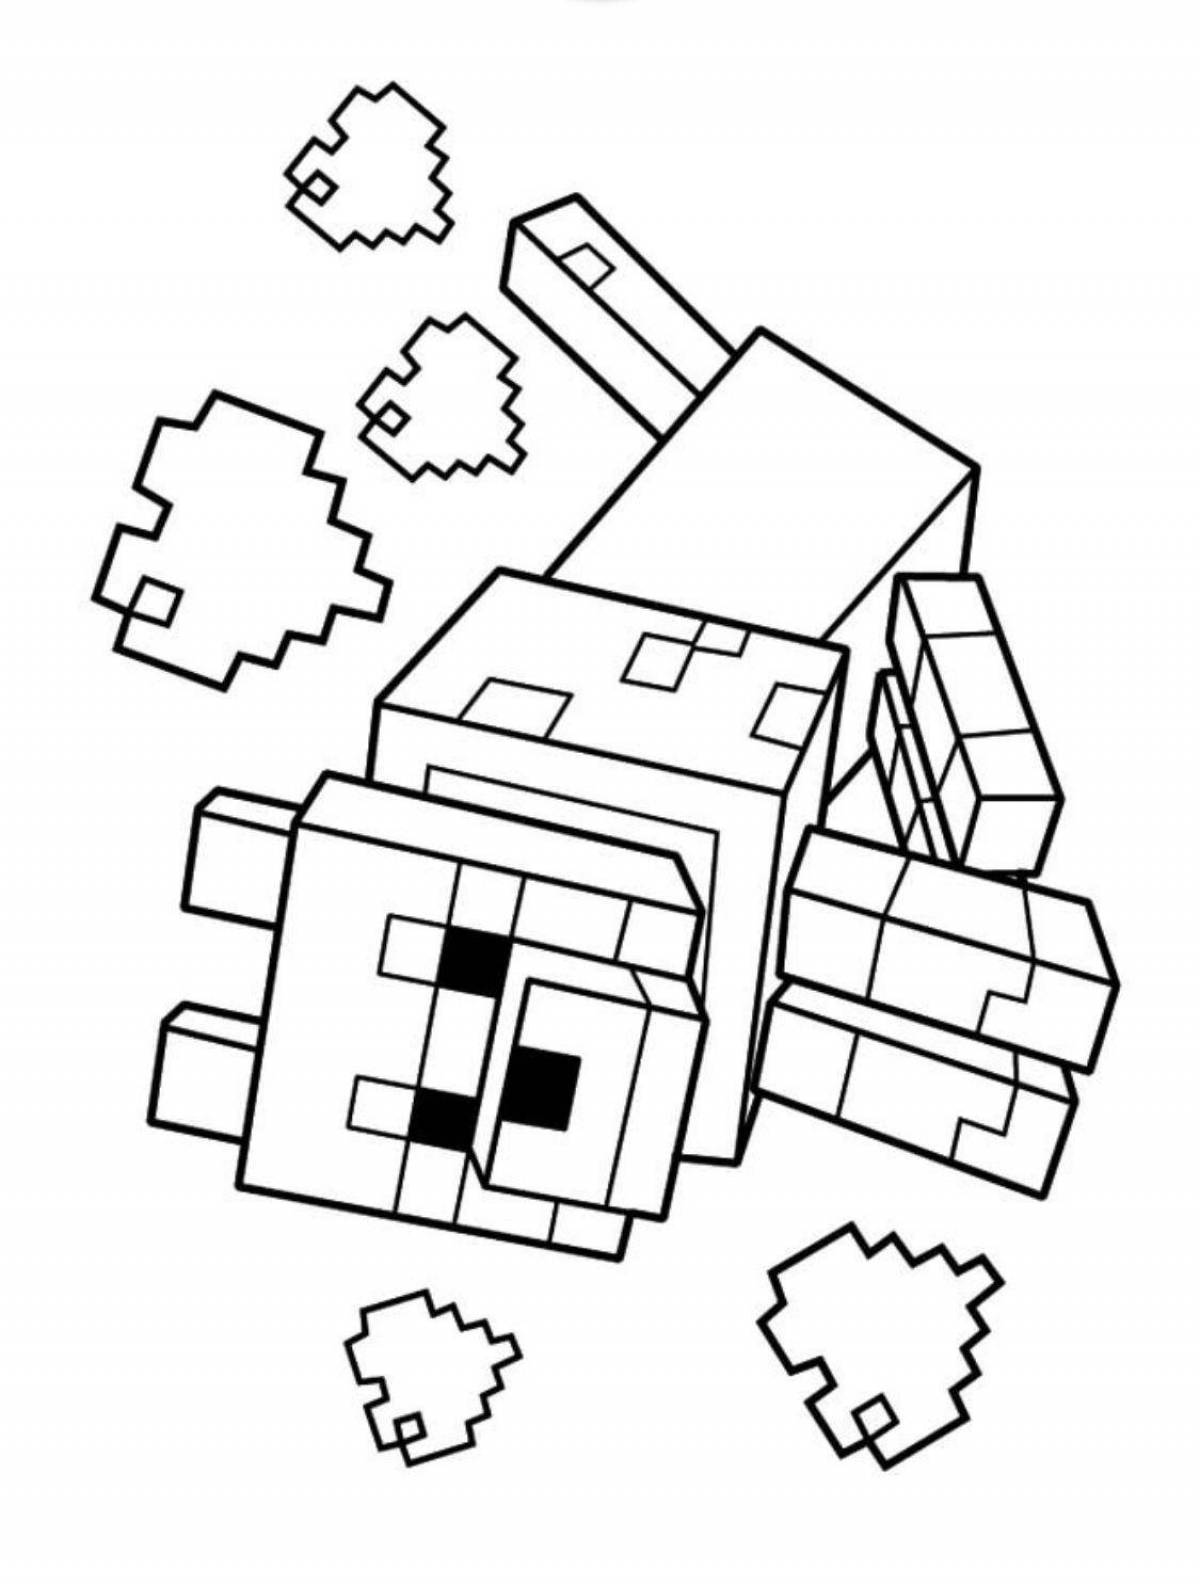 Playful minecraft dog coloring page